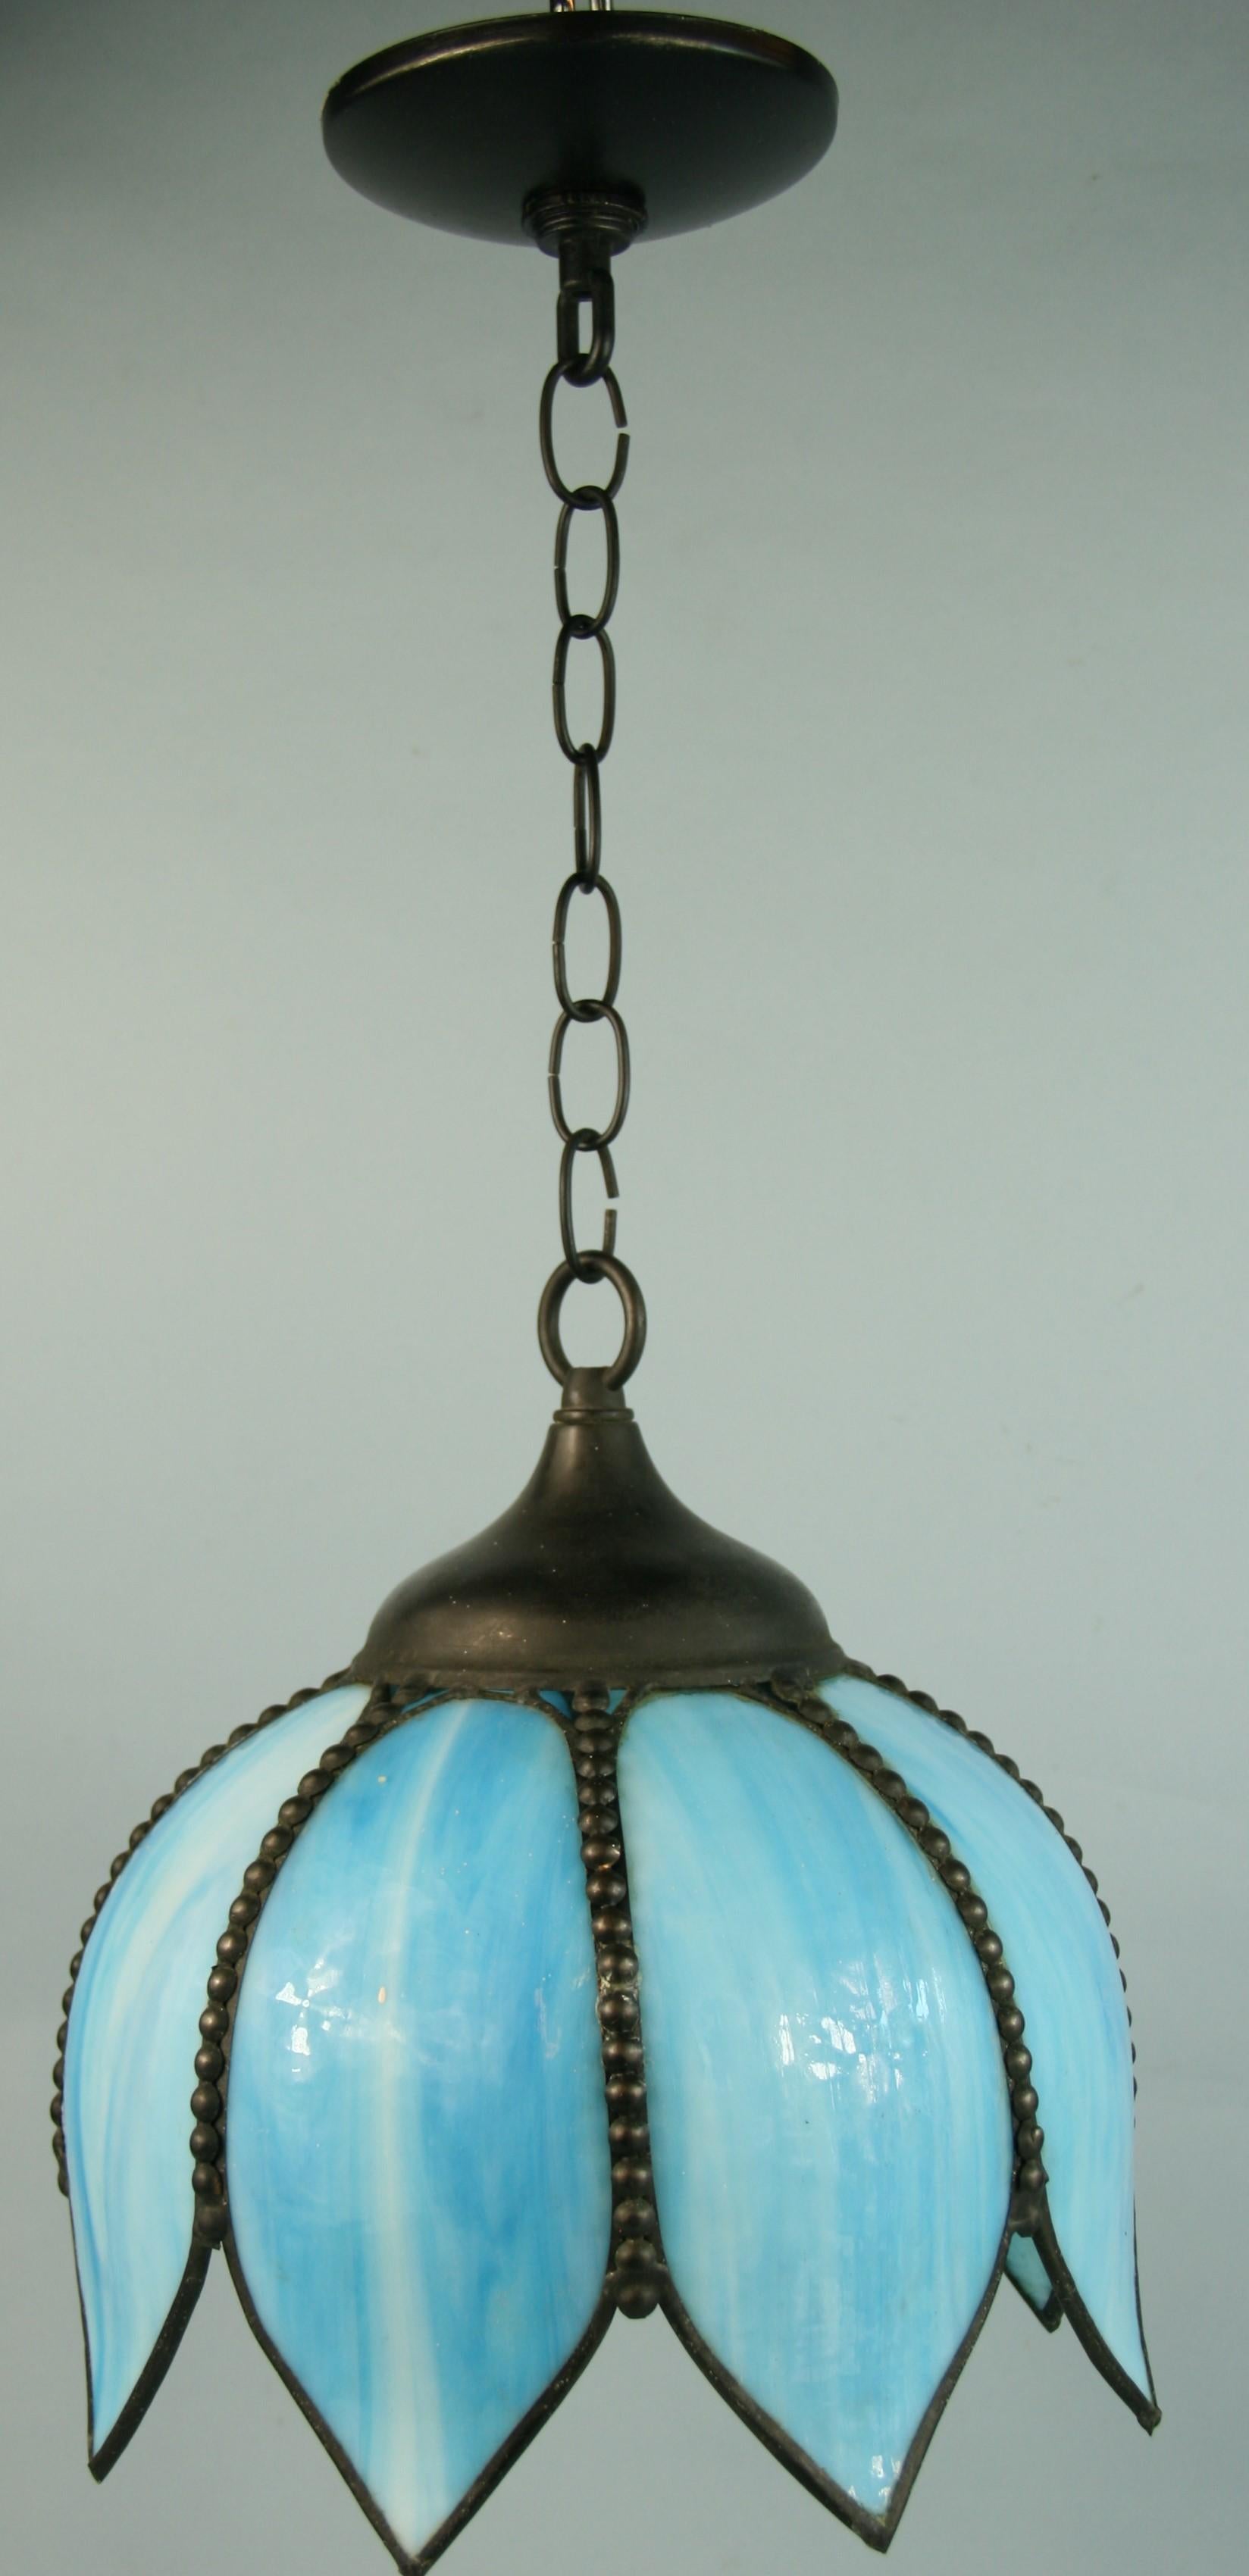 Blue and white tulip glass pendant
Takes one 100 Watt max Edison based bulb
Newly rewired
Dimensions 10